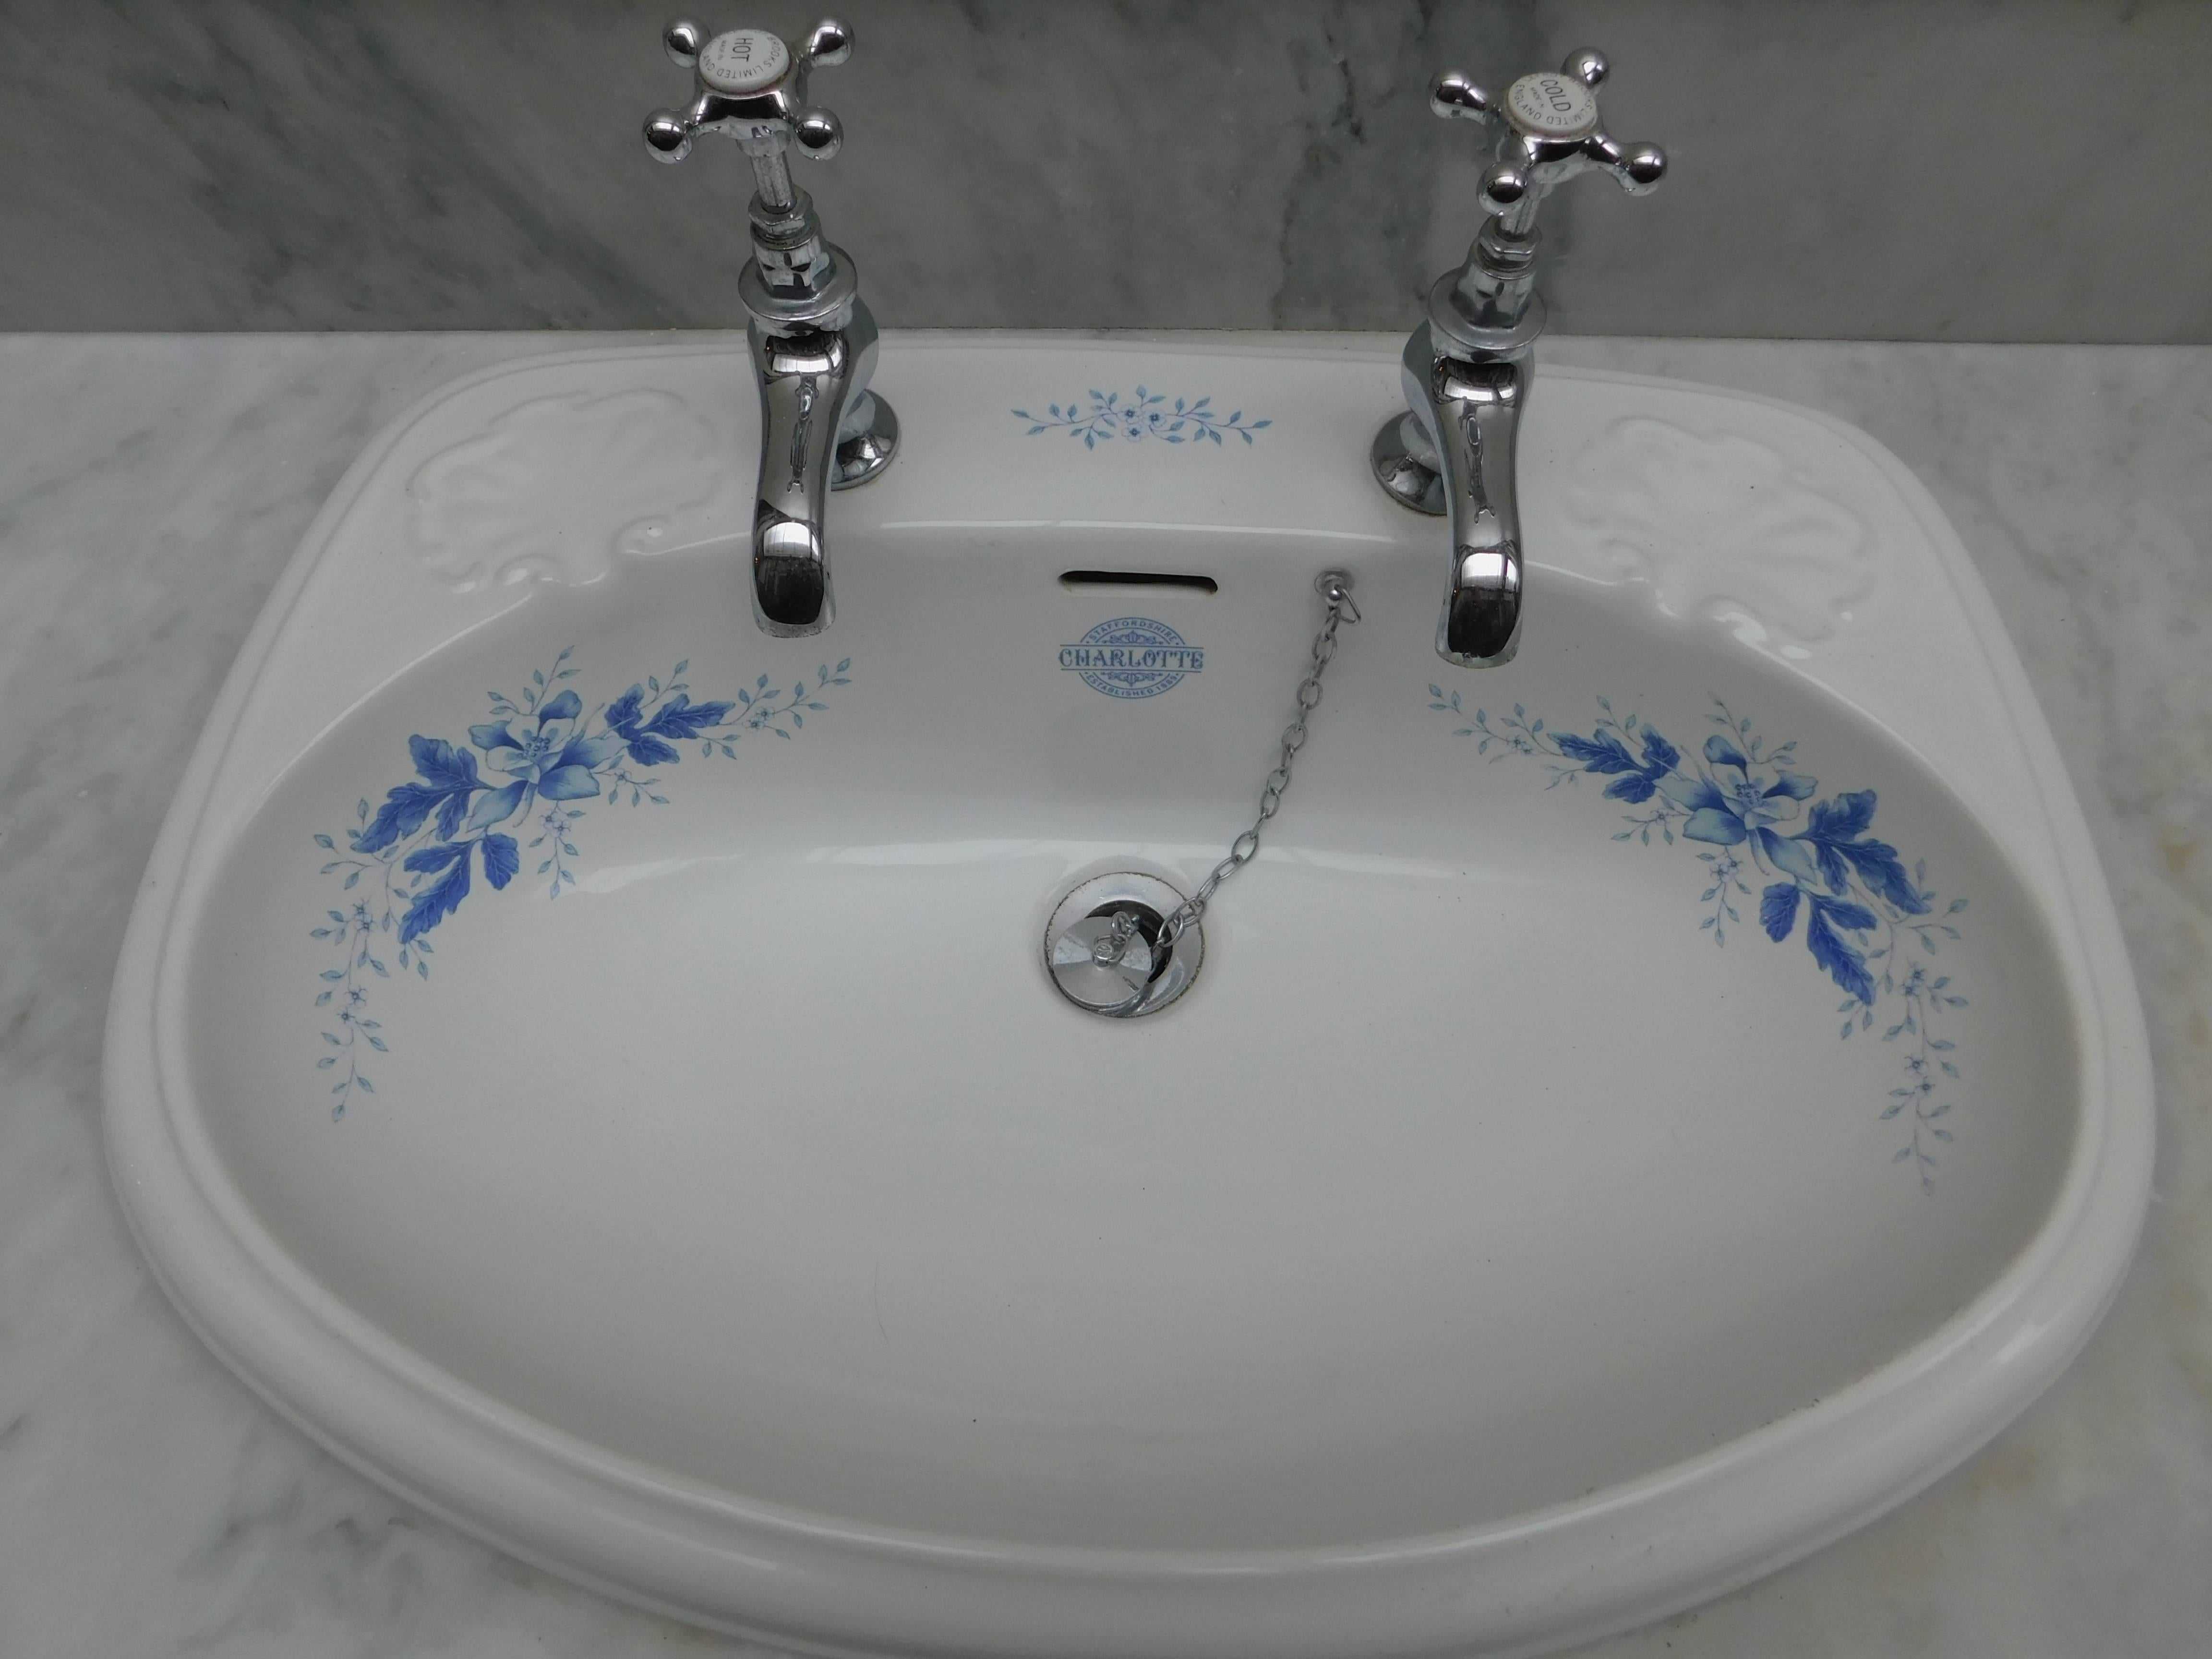 British Antique Marble Top Sink Vanity with Mirror and Blue and White Porcelain Sink